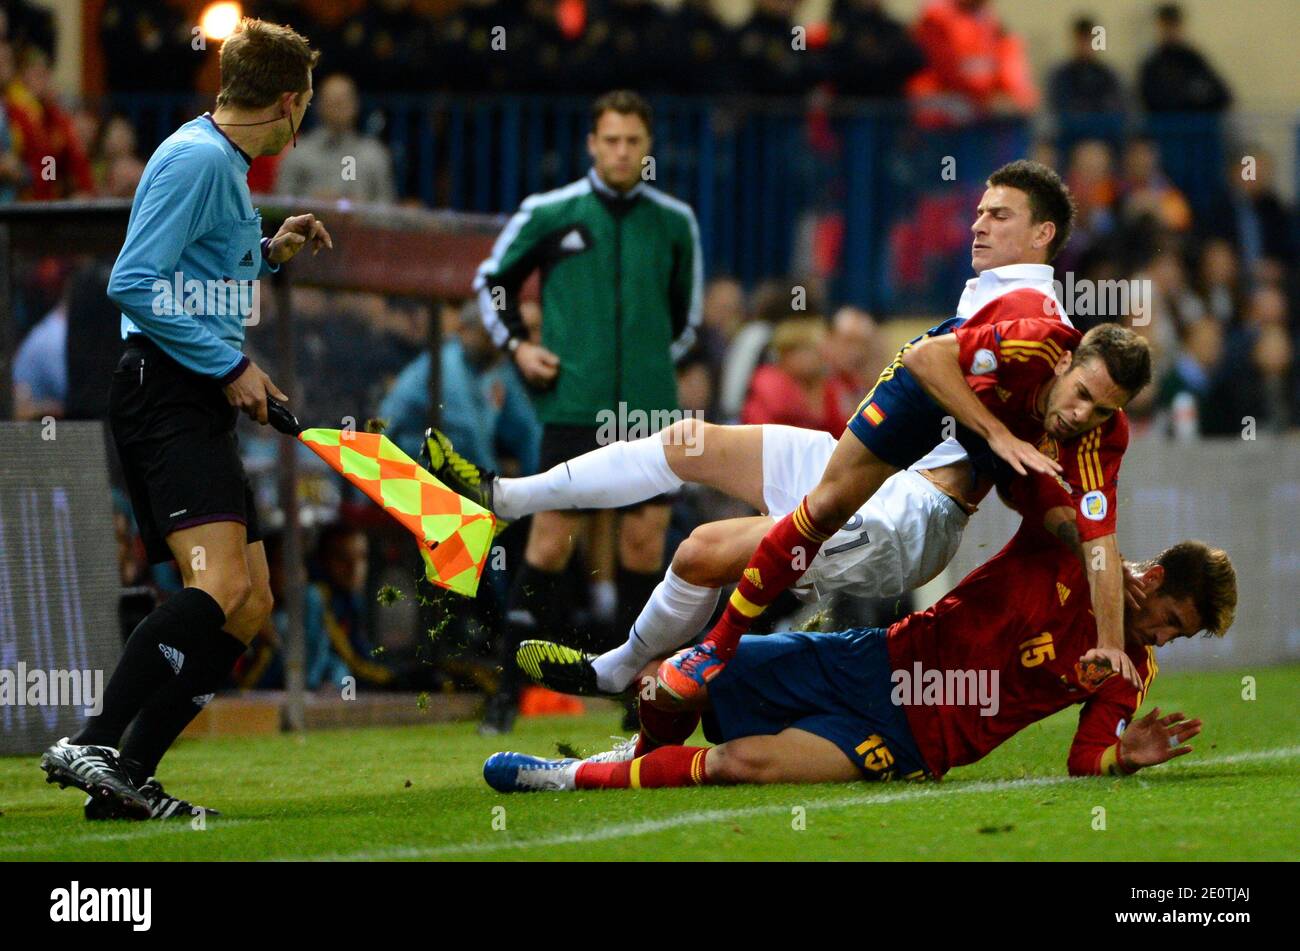 France's Laurent Koscielny, Spain's Jordi Alba and Sergio Ramos battle for the ball during the World Cup 2014 qualifying soccer match, Spain Vs France at Vicente Calderon stadium in Madrid, Spain on October 16, 2012. The match ended in a 1-1 draw. Photo by Christian Liewig/ABACAPRESS.COM Stock Photo